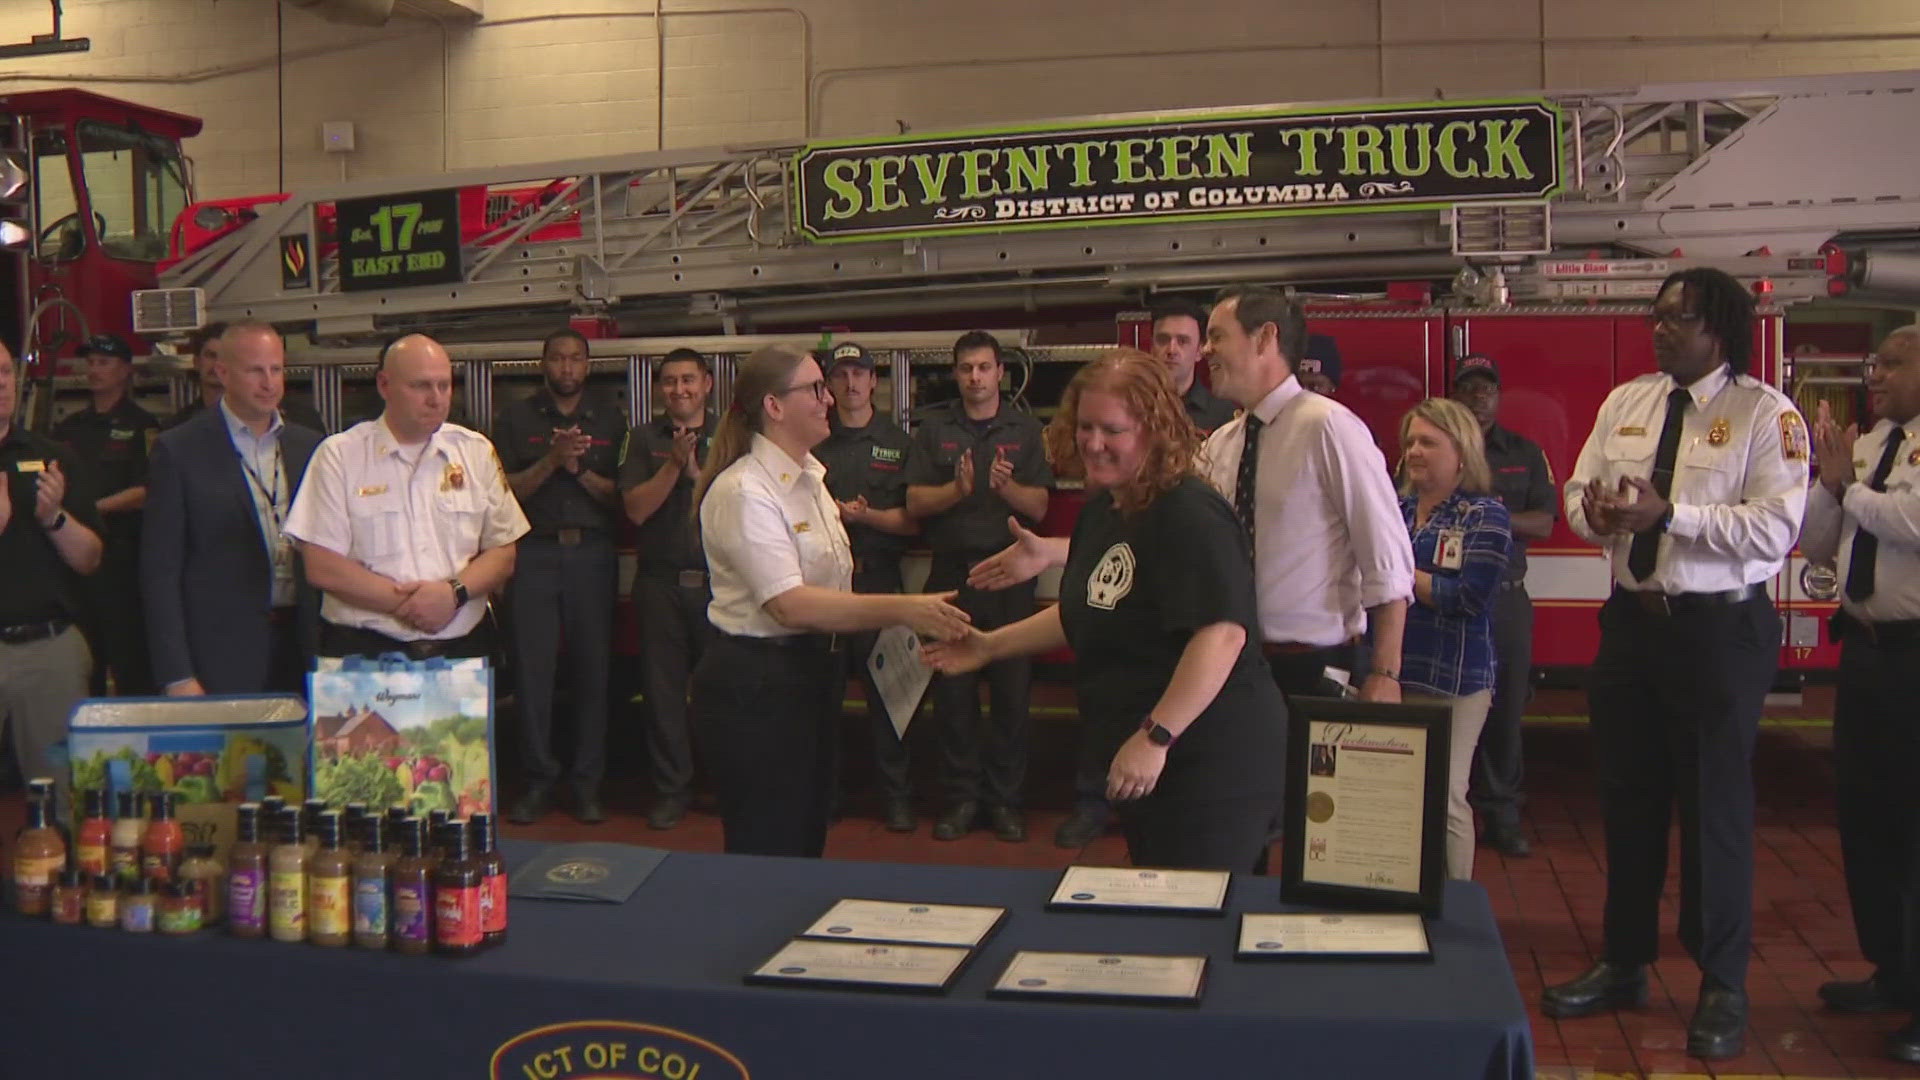 Pioneers of DC Fire and EMS’s Whole Blood Program received some worthy recognition Friday at Engine 30 on D.C.'s Northeast side.